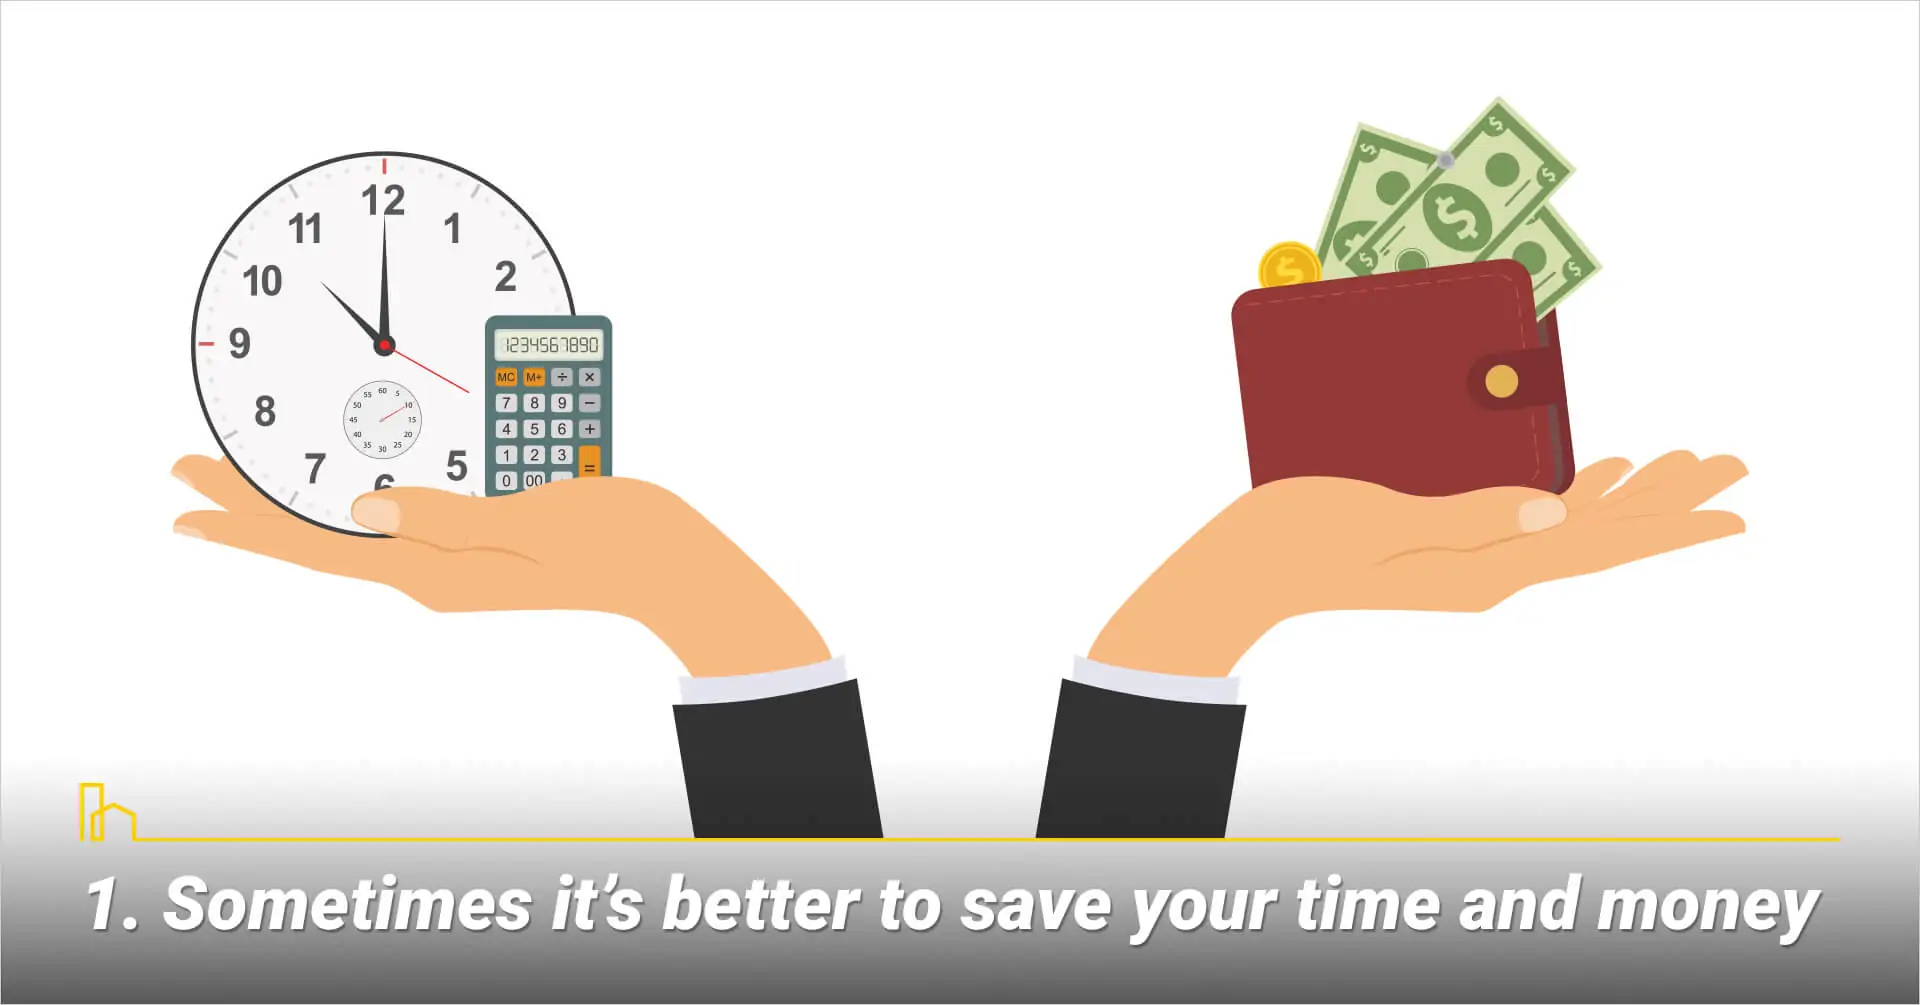 Sometimes it’s better to save your time and money, saving your resources